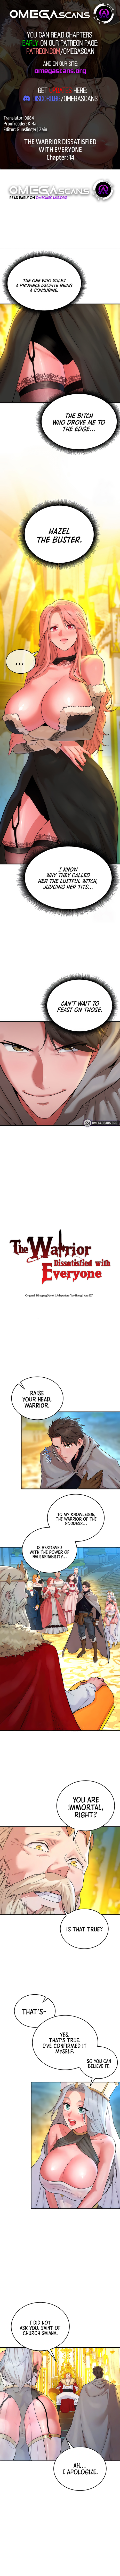 The Warrior Dissatisfied With Everyone - Chapter 14 - Omega Scans